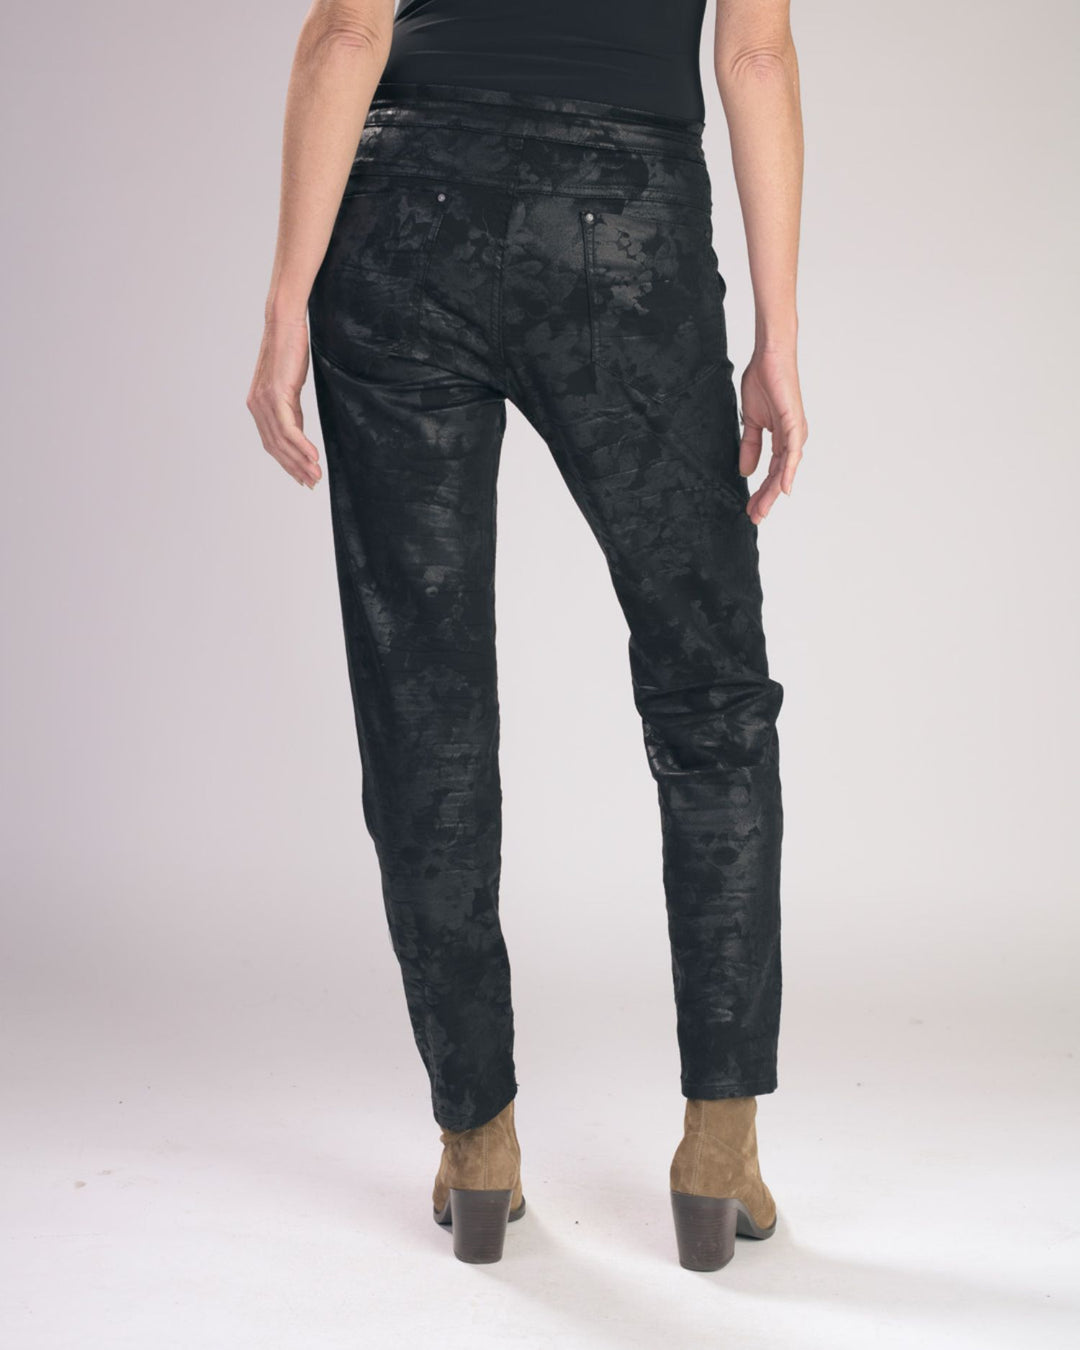 Floral Iconic Stretch Jeans, Black